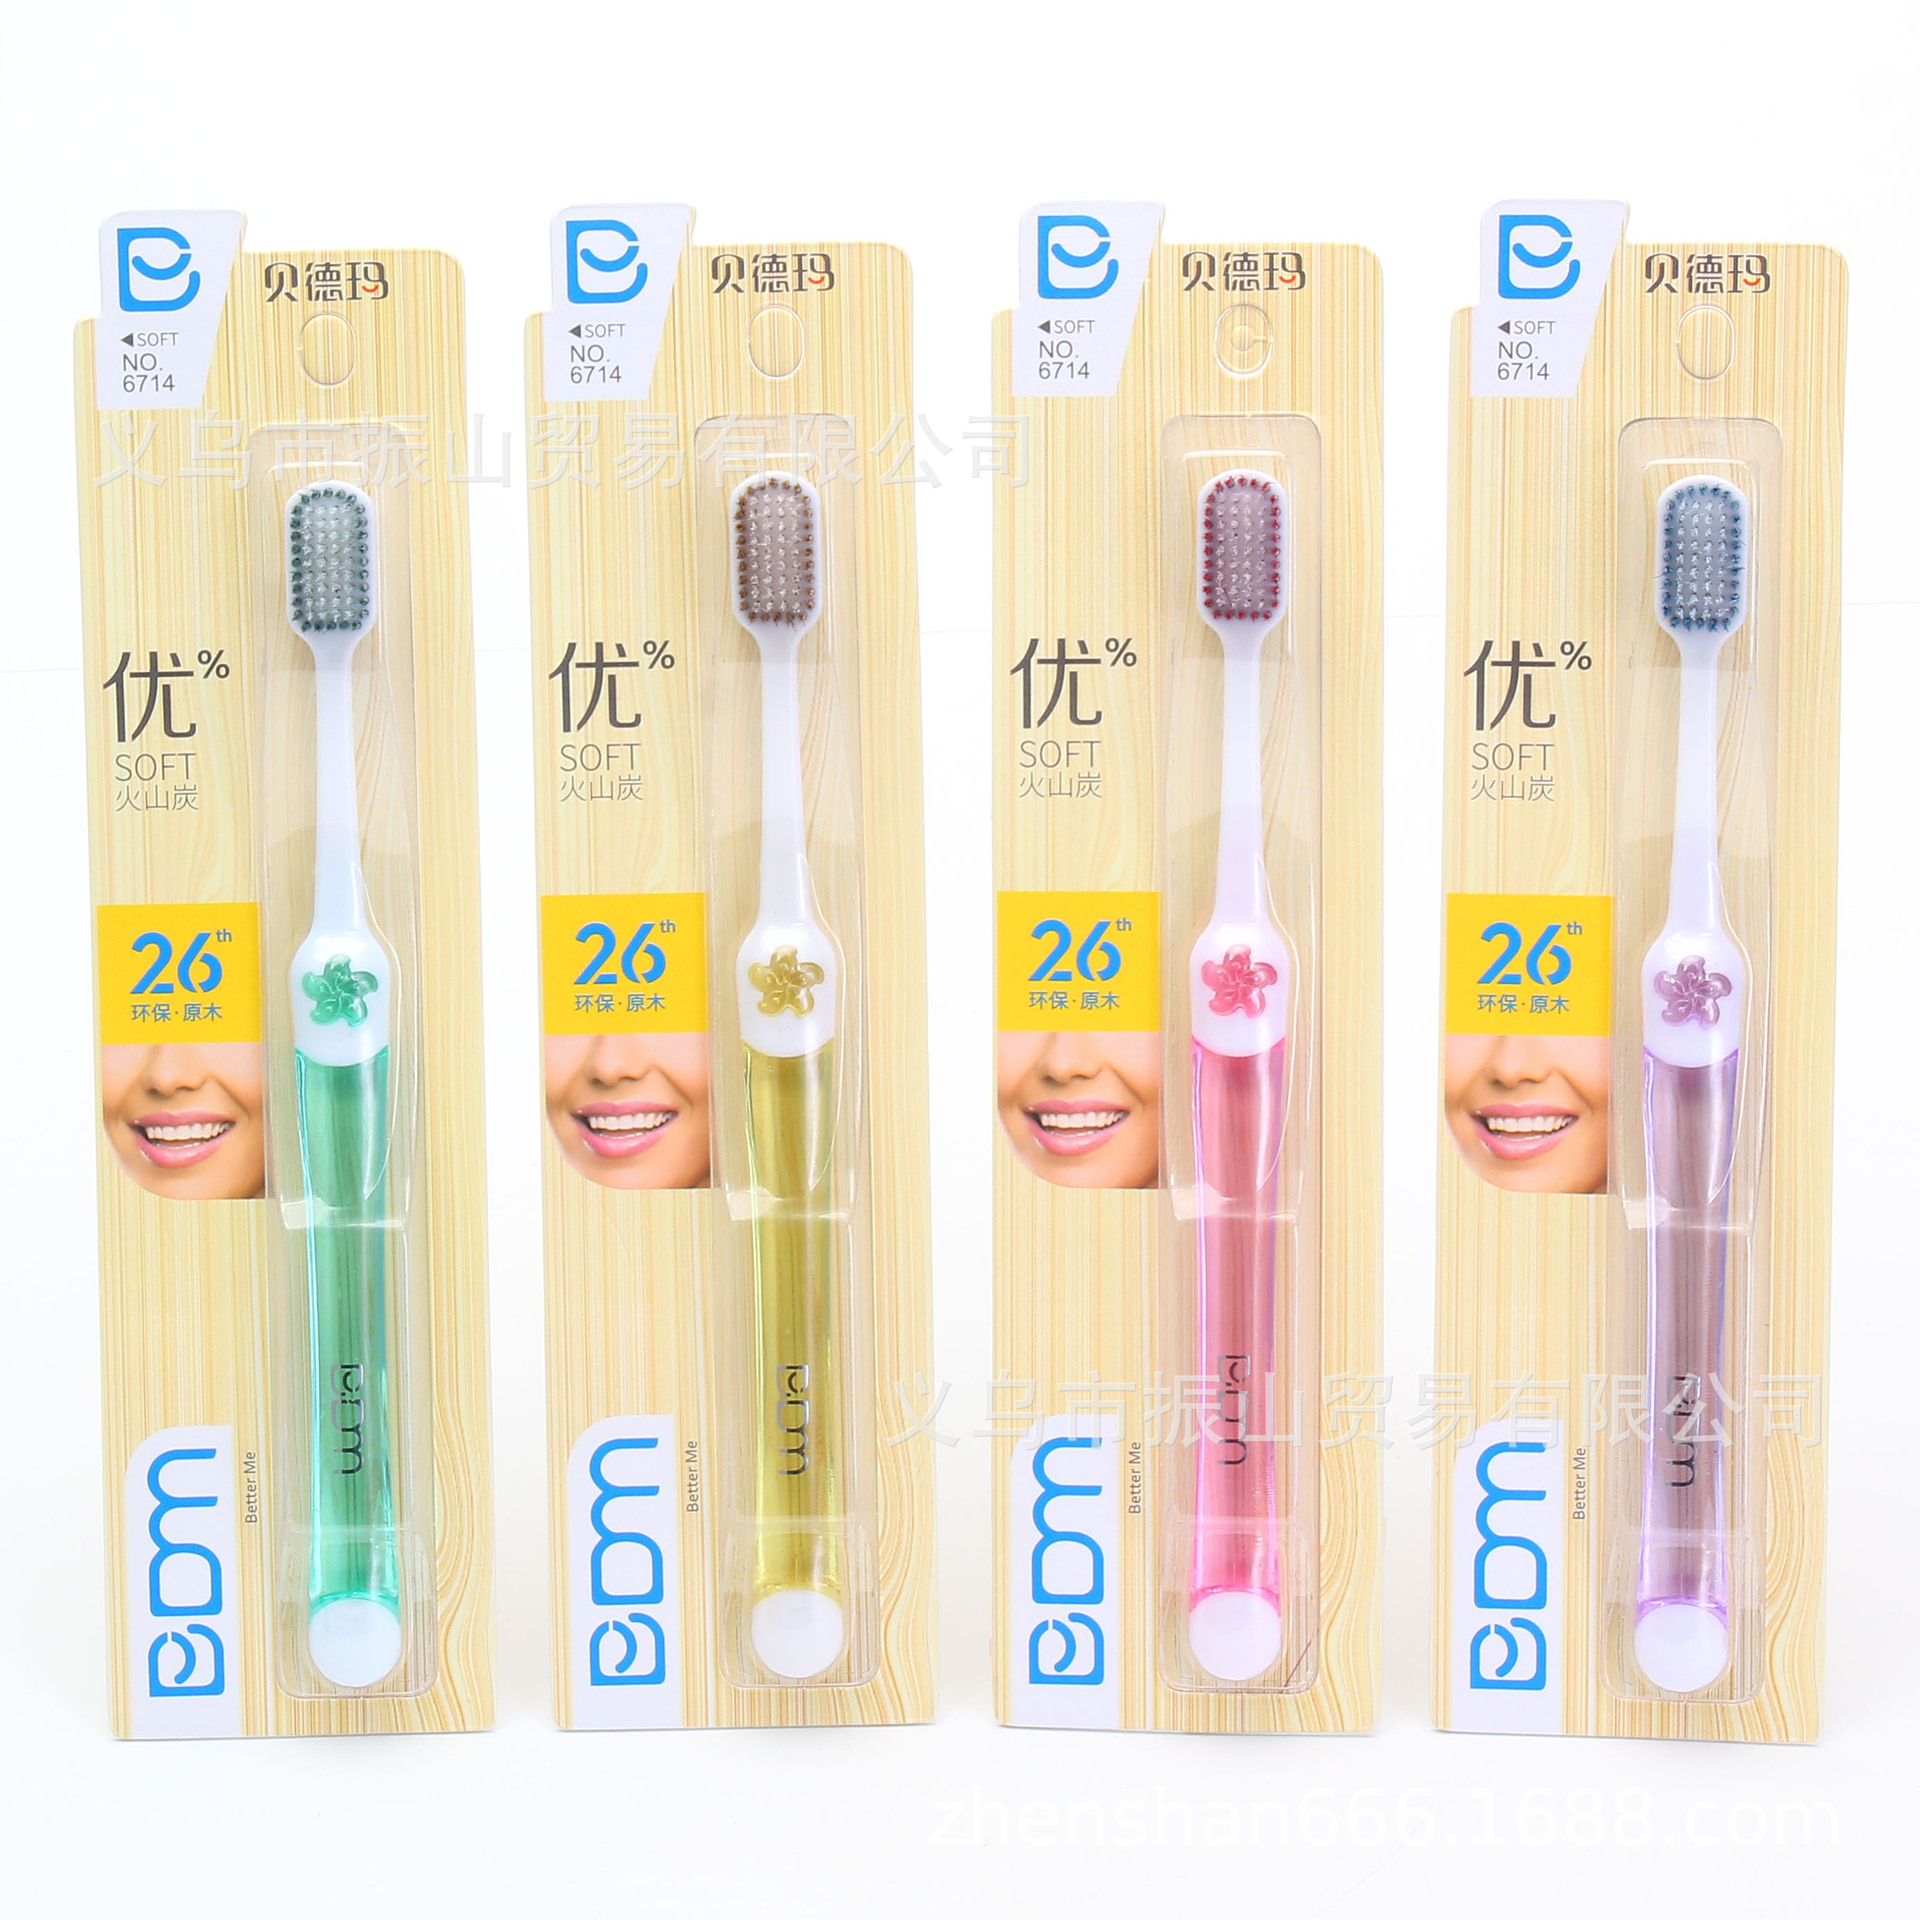 Bdm6714 Water-Sensitive Excellent Protection Volcano Charcoal Brush Delicate Smart Bruch Head Soft-Bristle Toothbrush